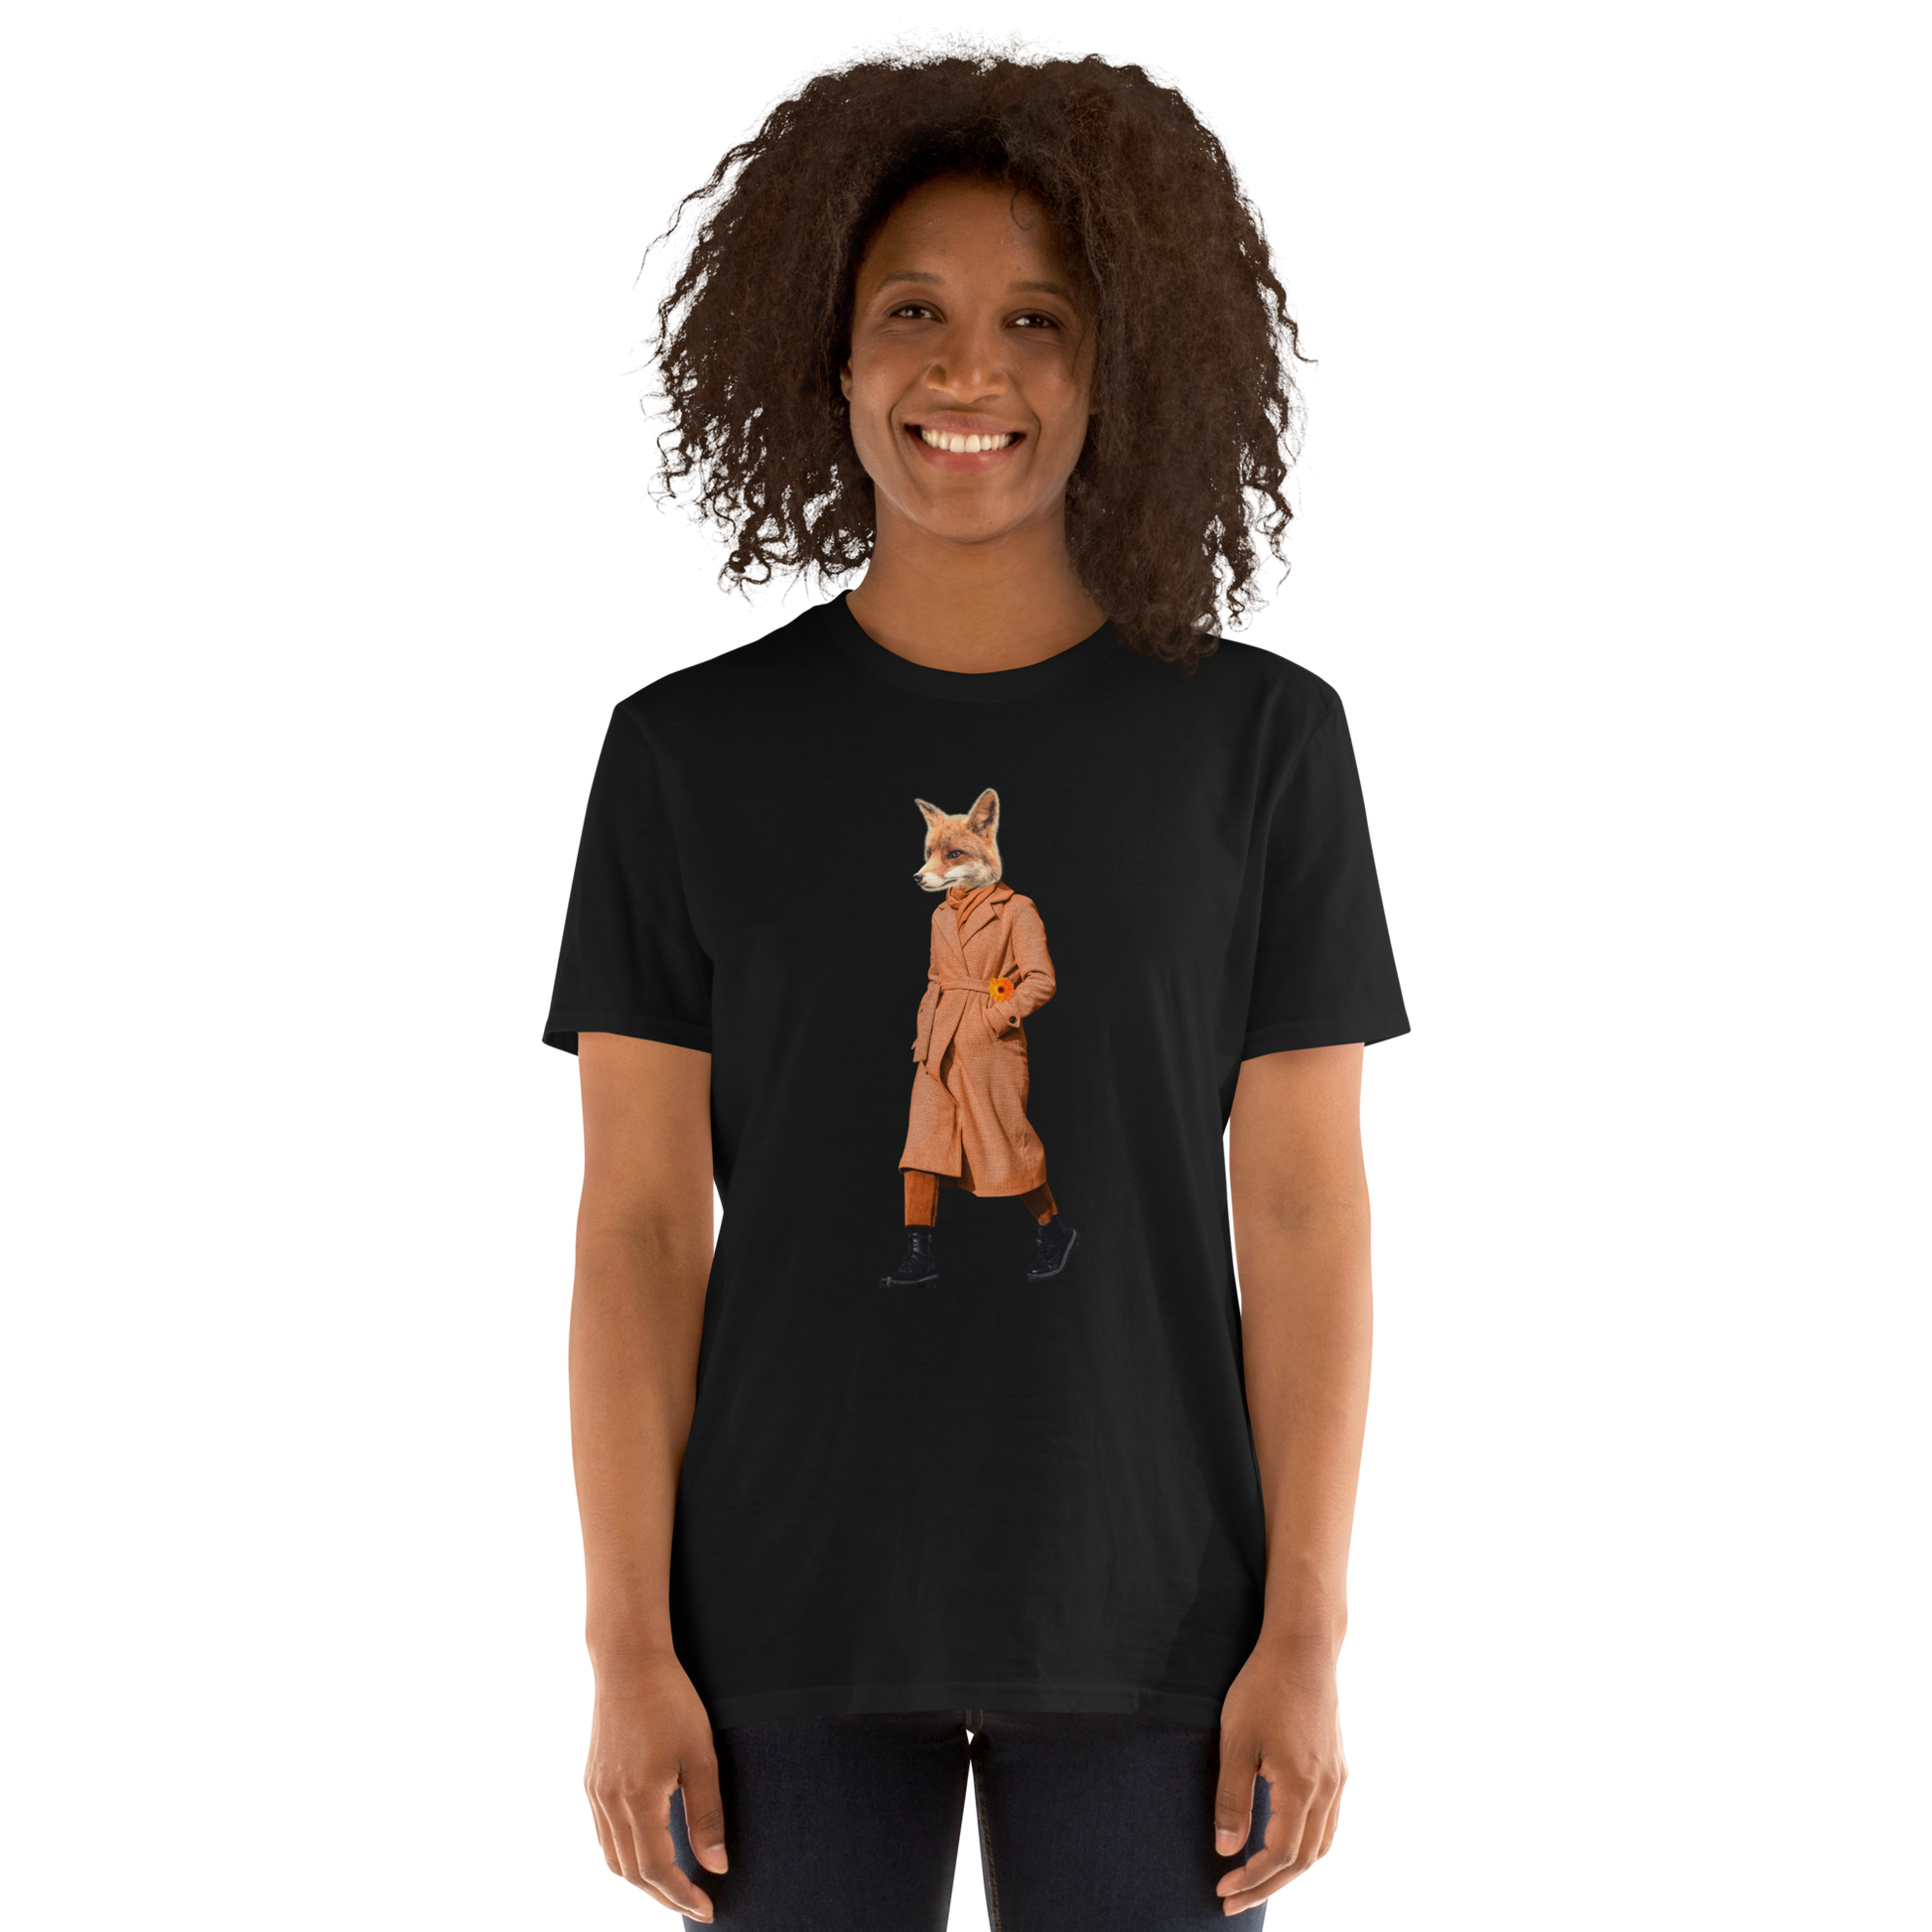 Smiling woman wearing a Black Anthropomorphic Fox T-Shirt featuring a sly Anthropomorphic Fox In a Trench Coat graphic on the chest - Funny Graphic Fox T-Shirts - Boozy Fox